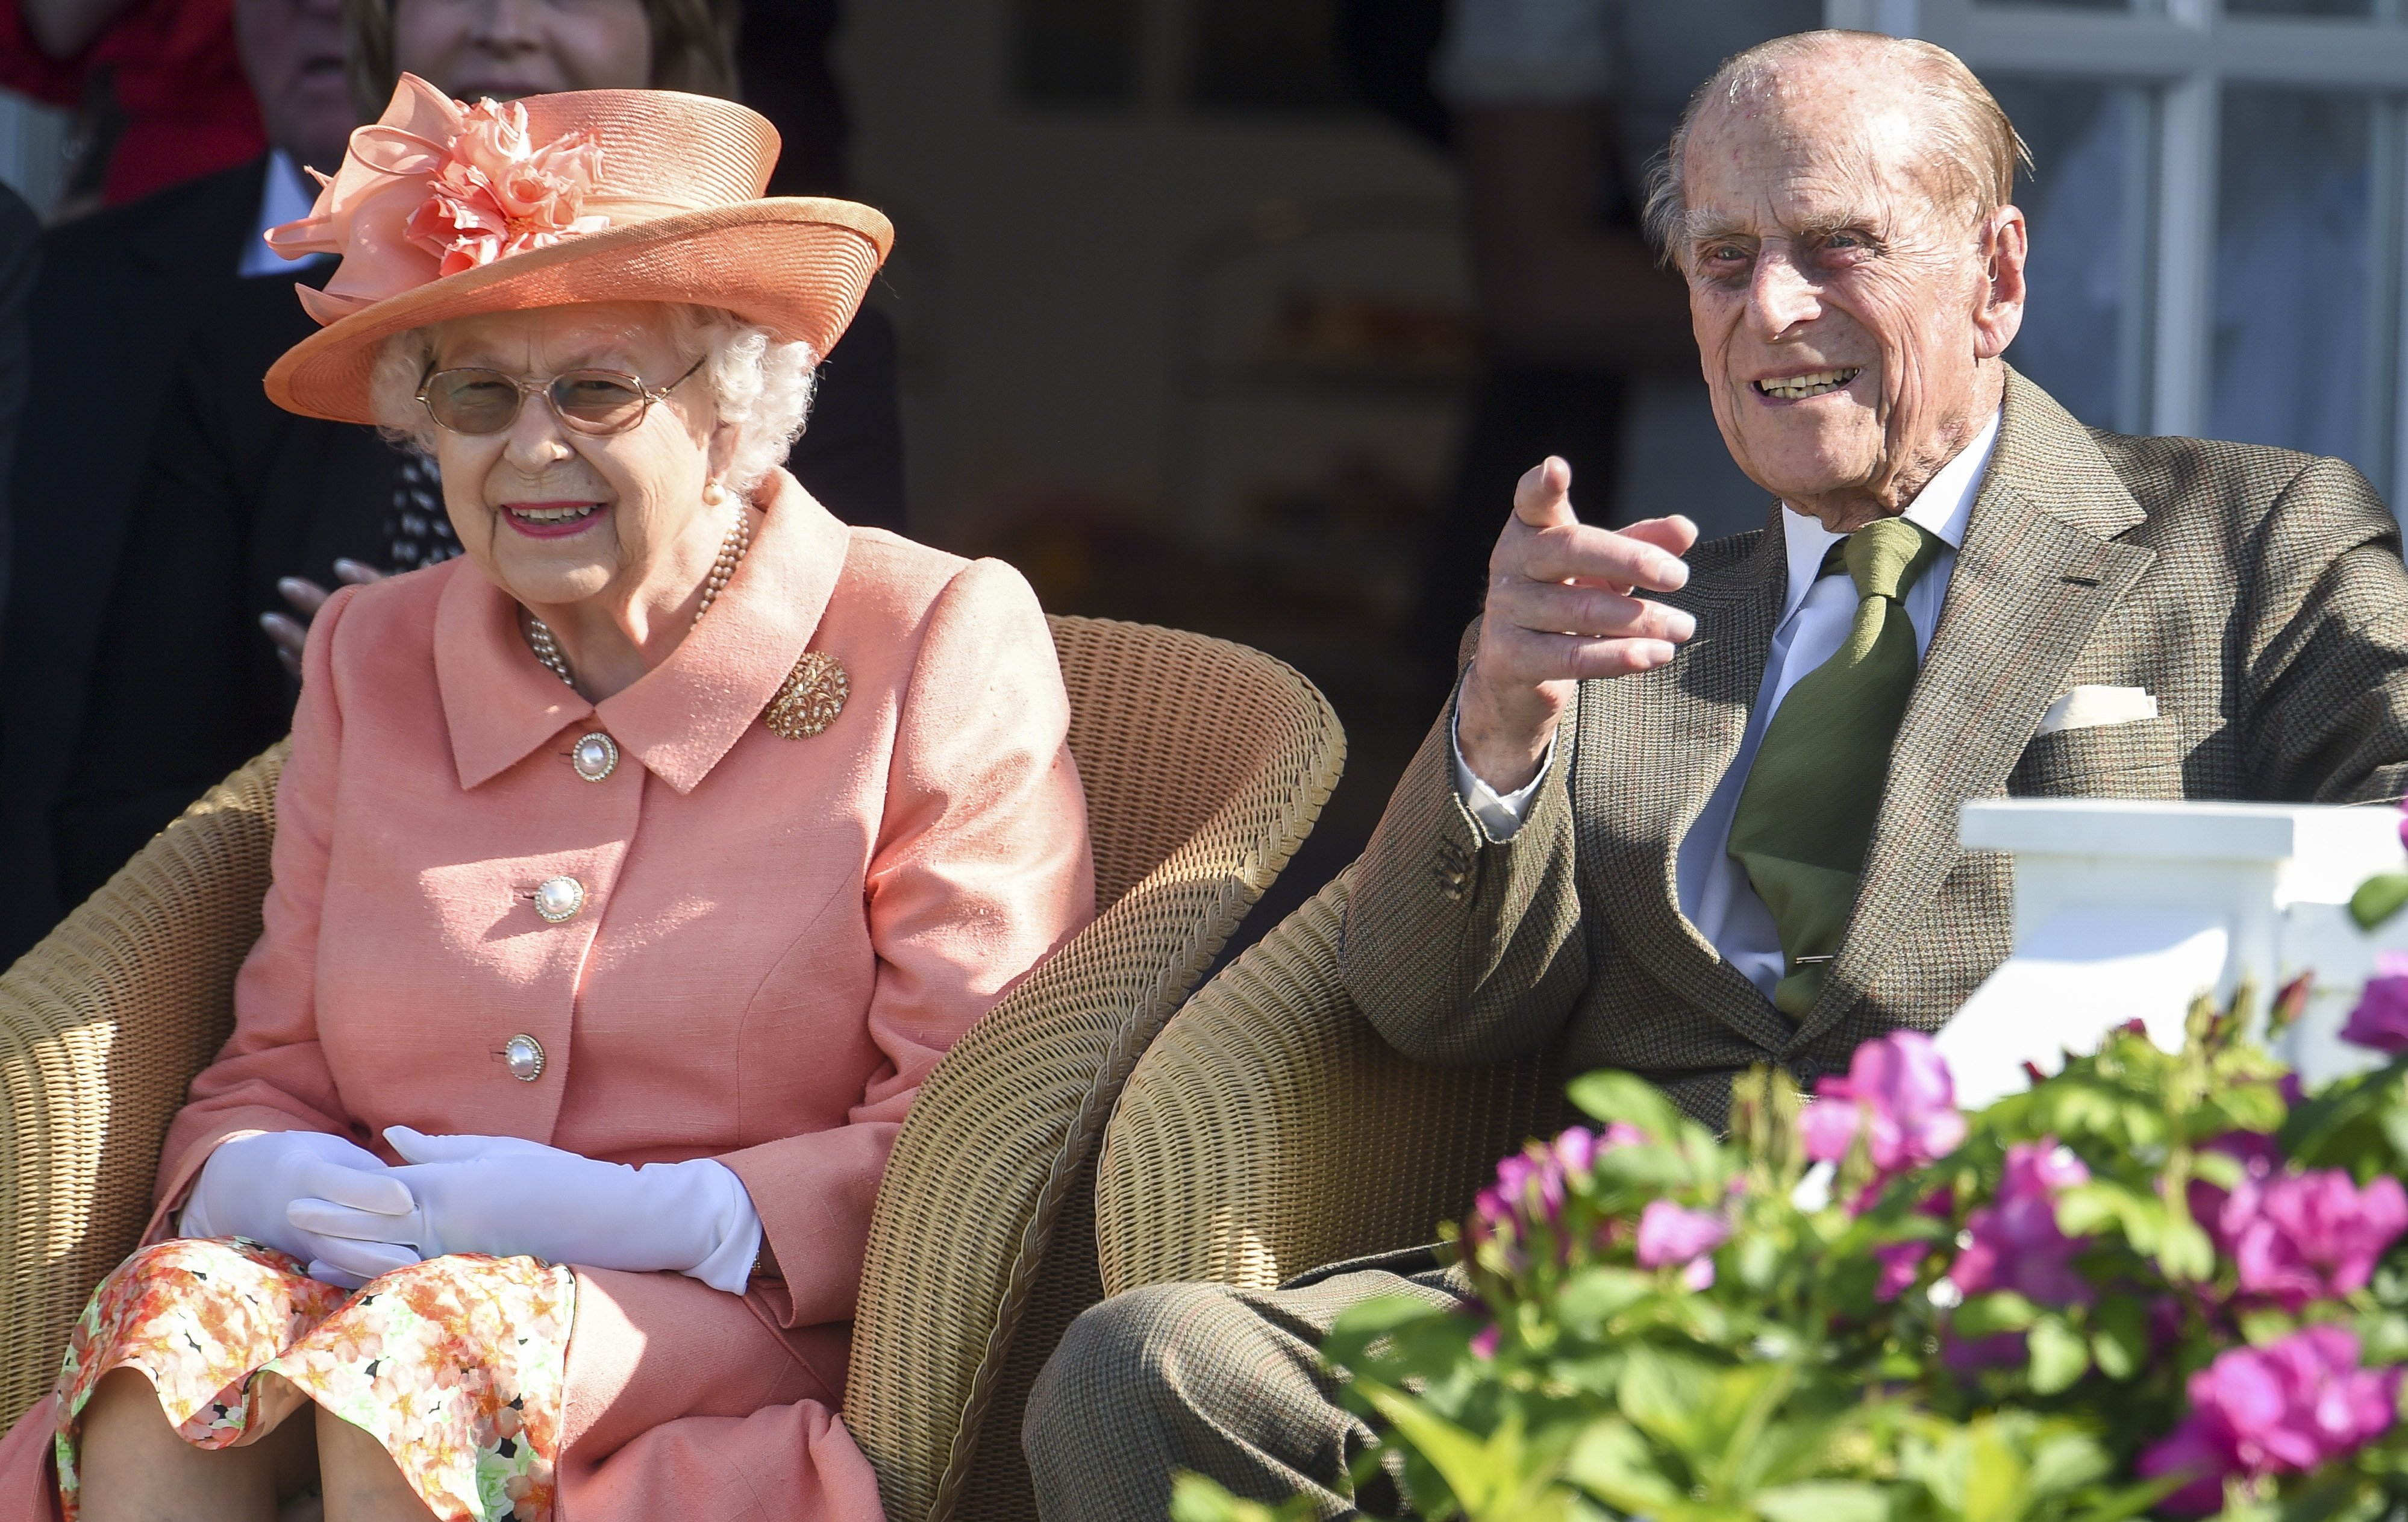 Queen Elizabeth II and Prince Philip, Duke of Edinburgh, attend The OUT-SOURCING Inc Royal Windsor Cup 2018 polo match at Guards Polo Club on June 24, 2018, in Egham, England. | Source: Getty Images